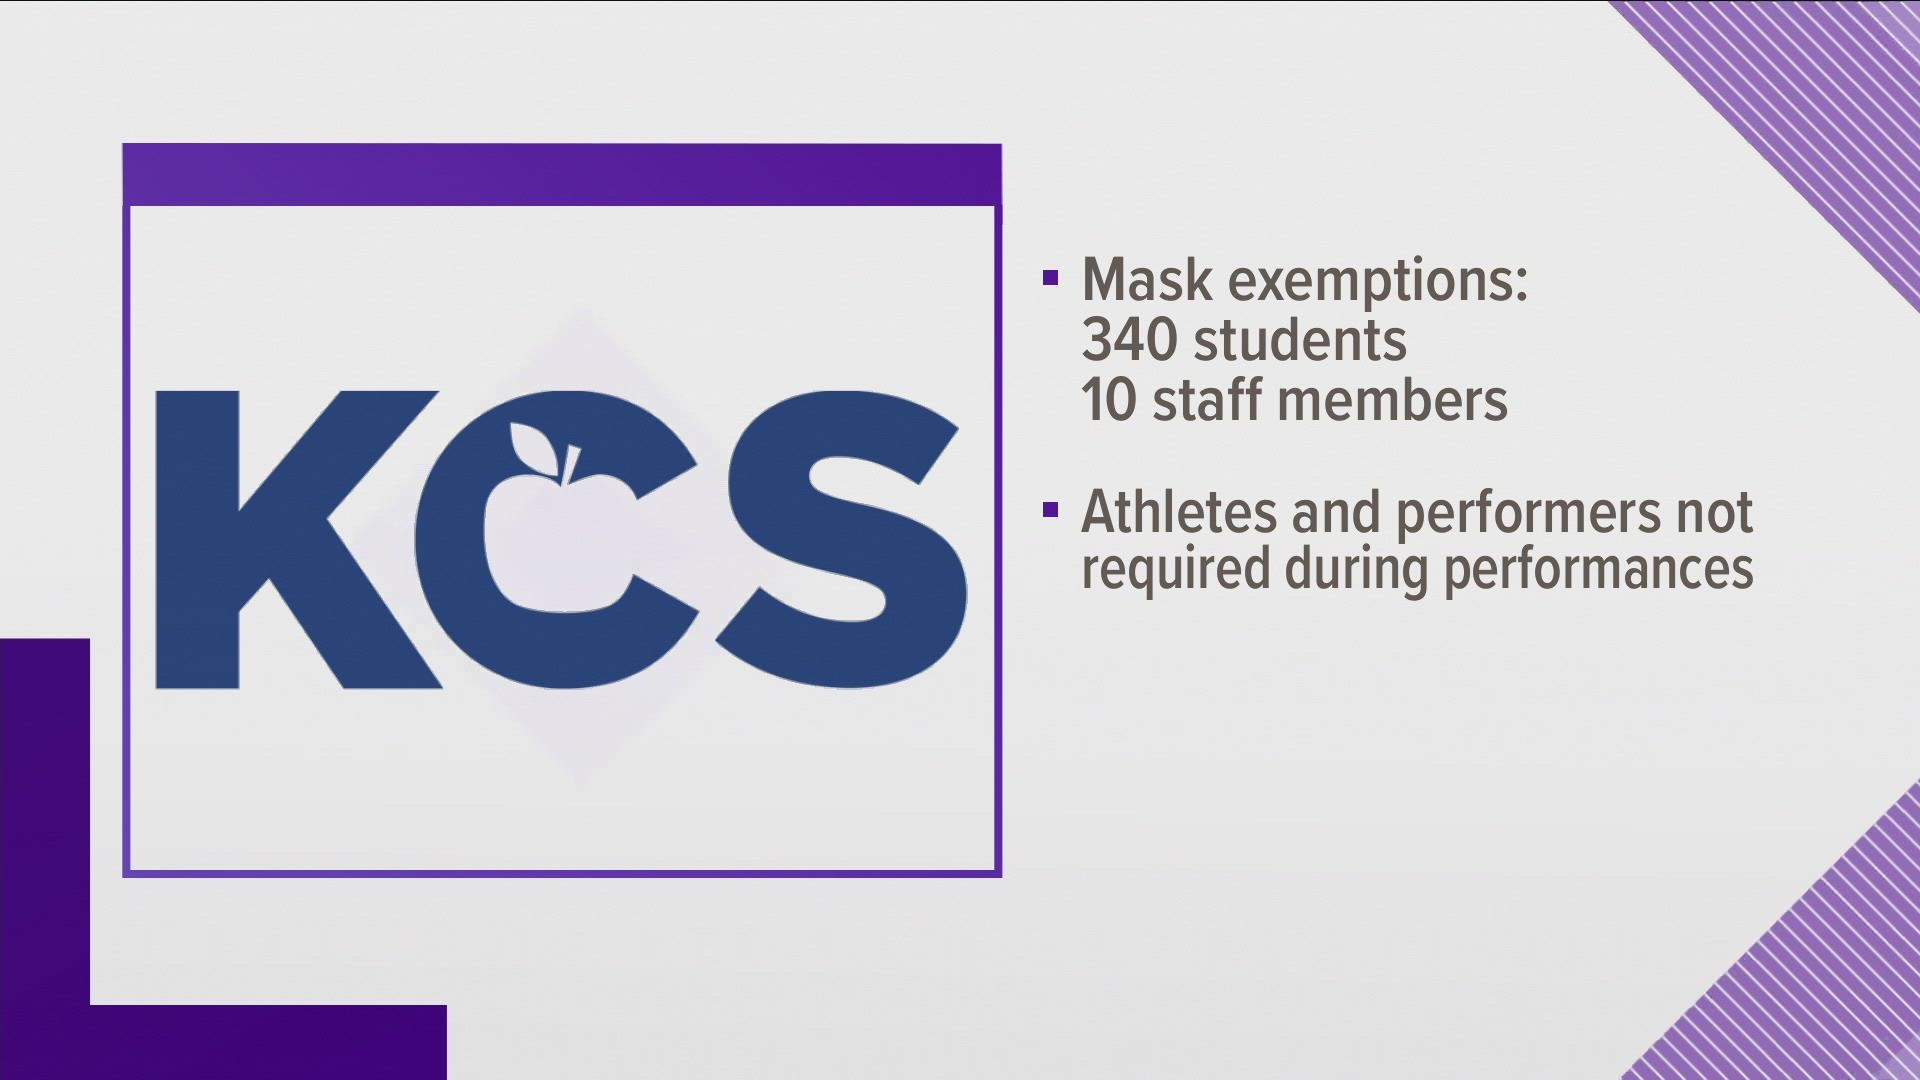 KCS said it will not require athletes and other performers to wear masks while competing or performing.